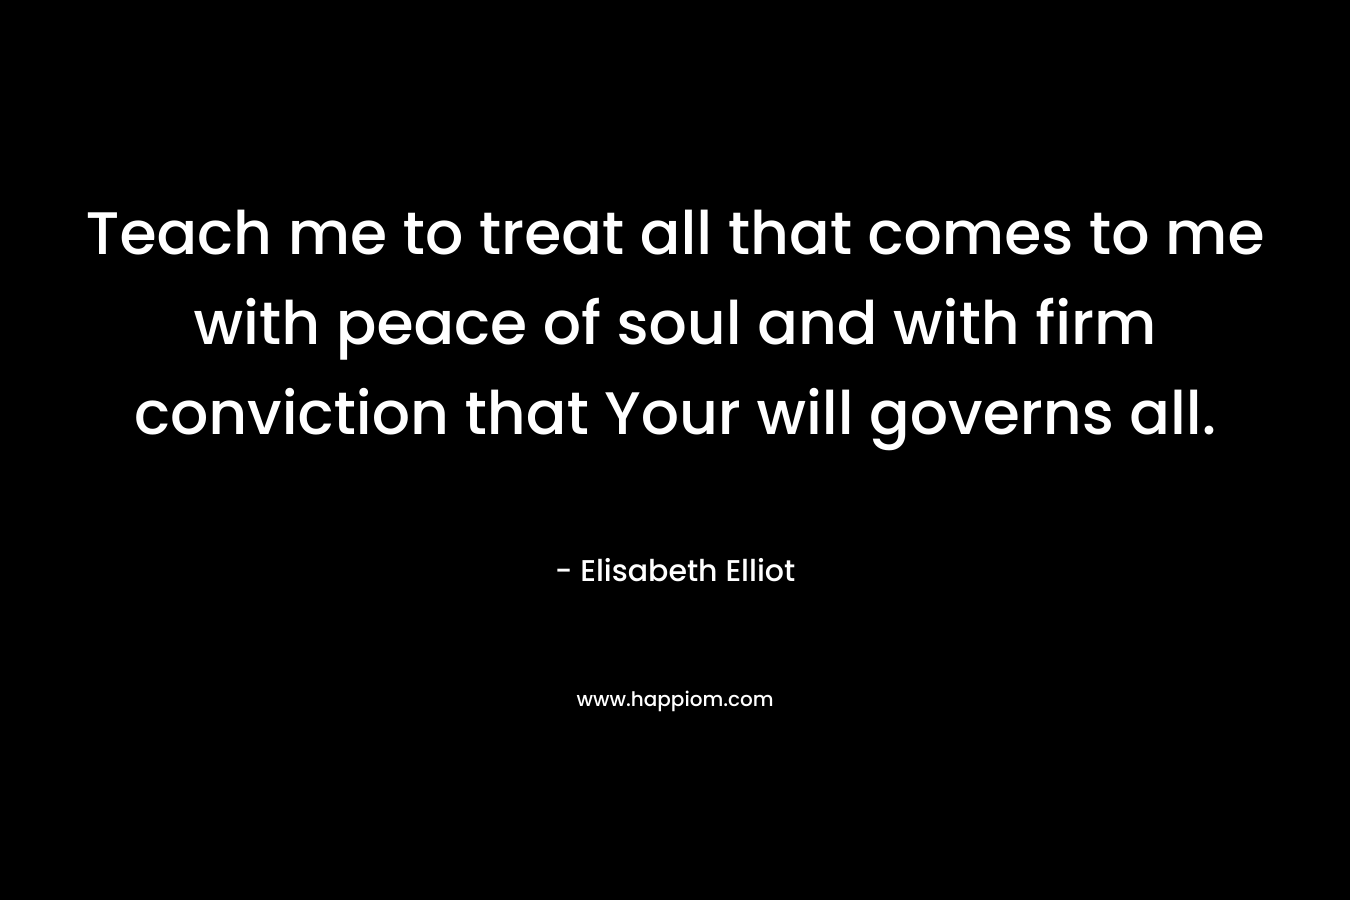 Teach me to treat all that comes to me with peace of soul and with firm conviction that Your will governs all.